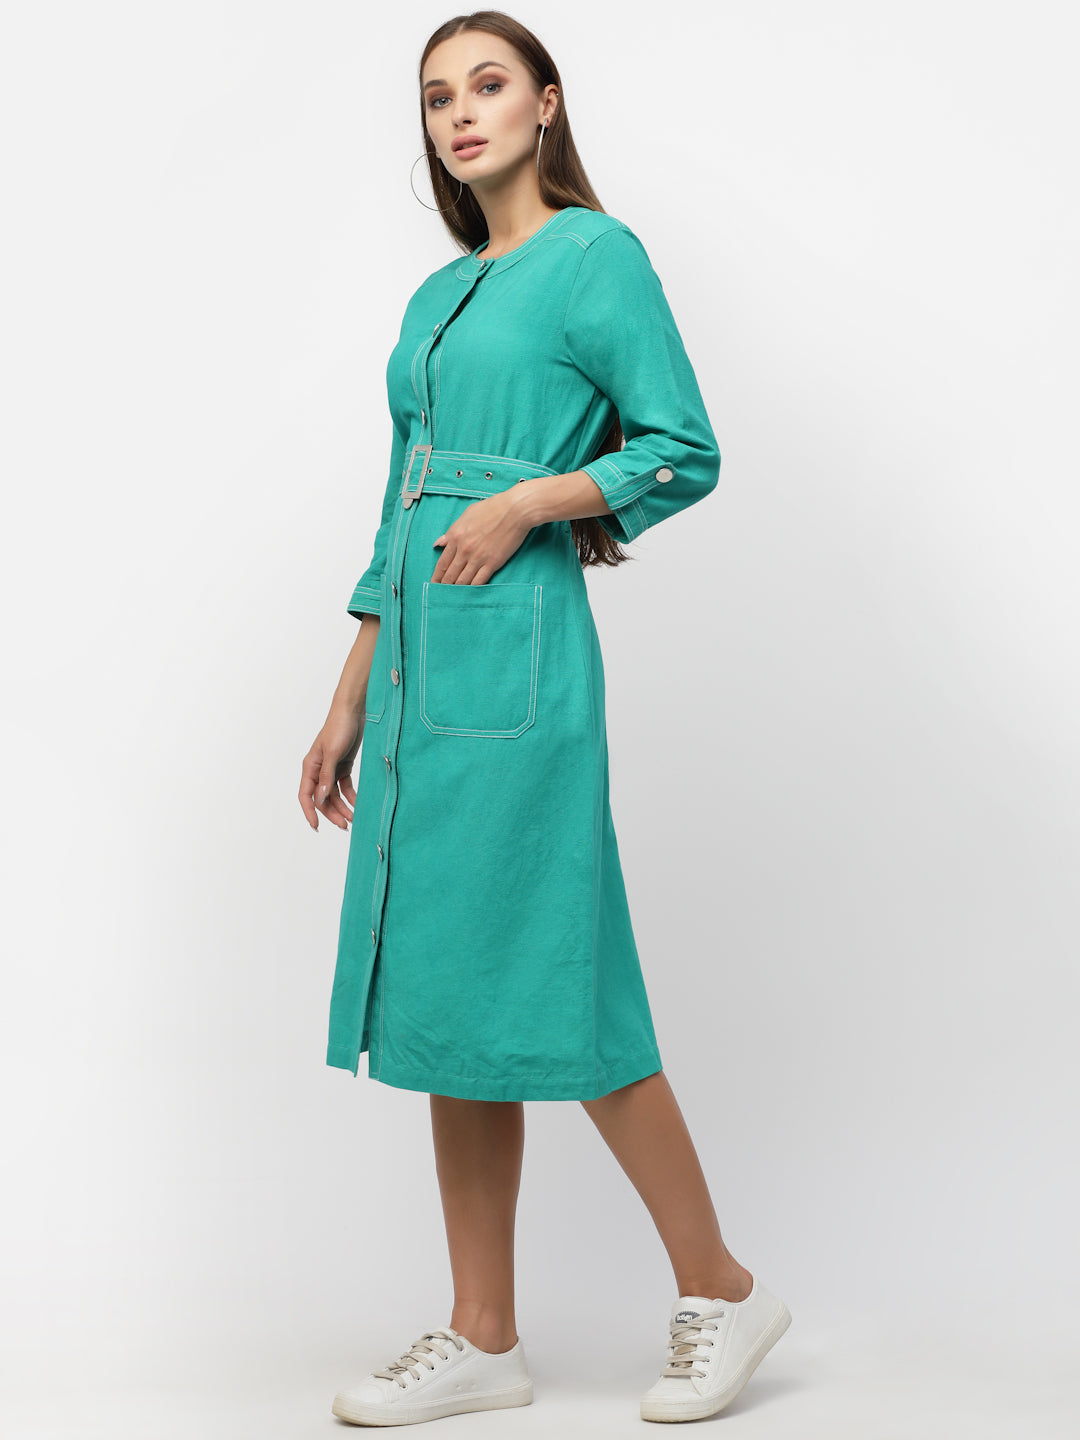 Blanc9 Green With Silver Buckle Belt Dress-B9DR118